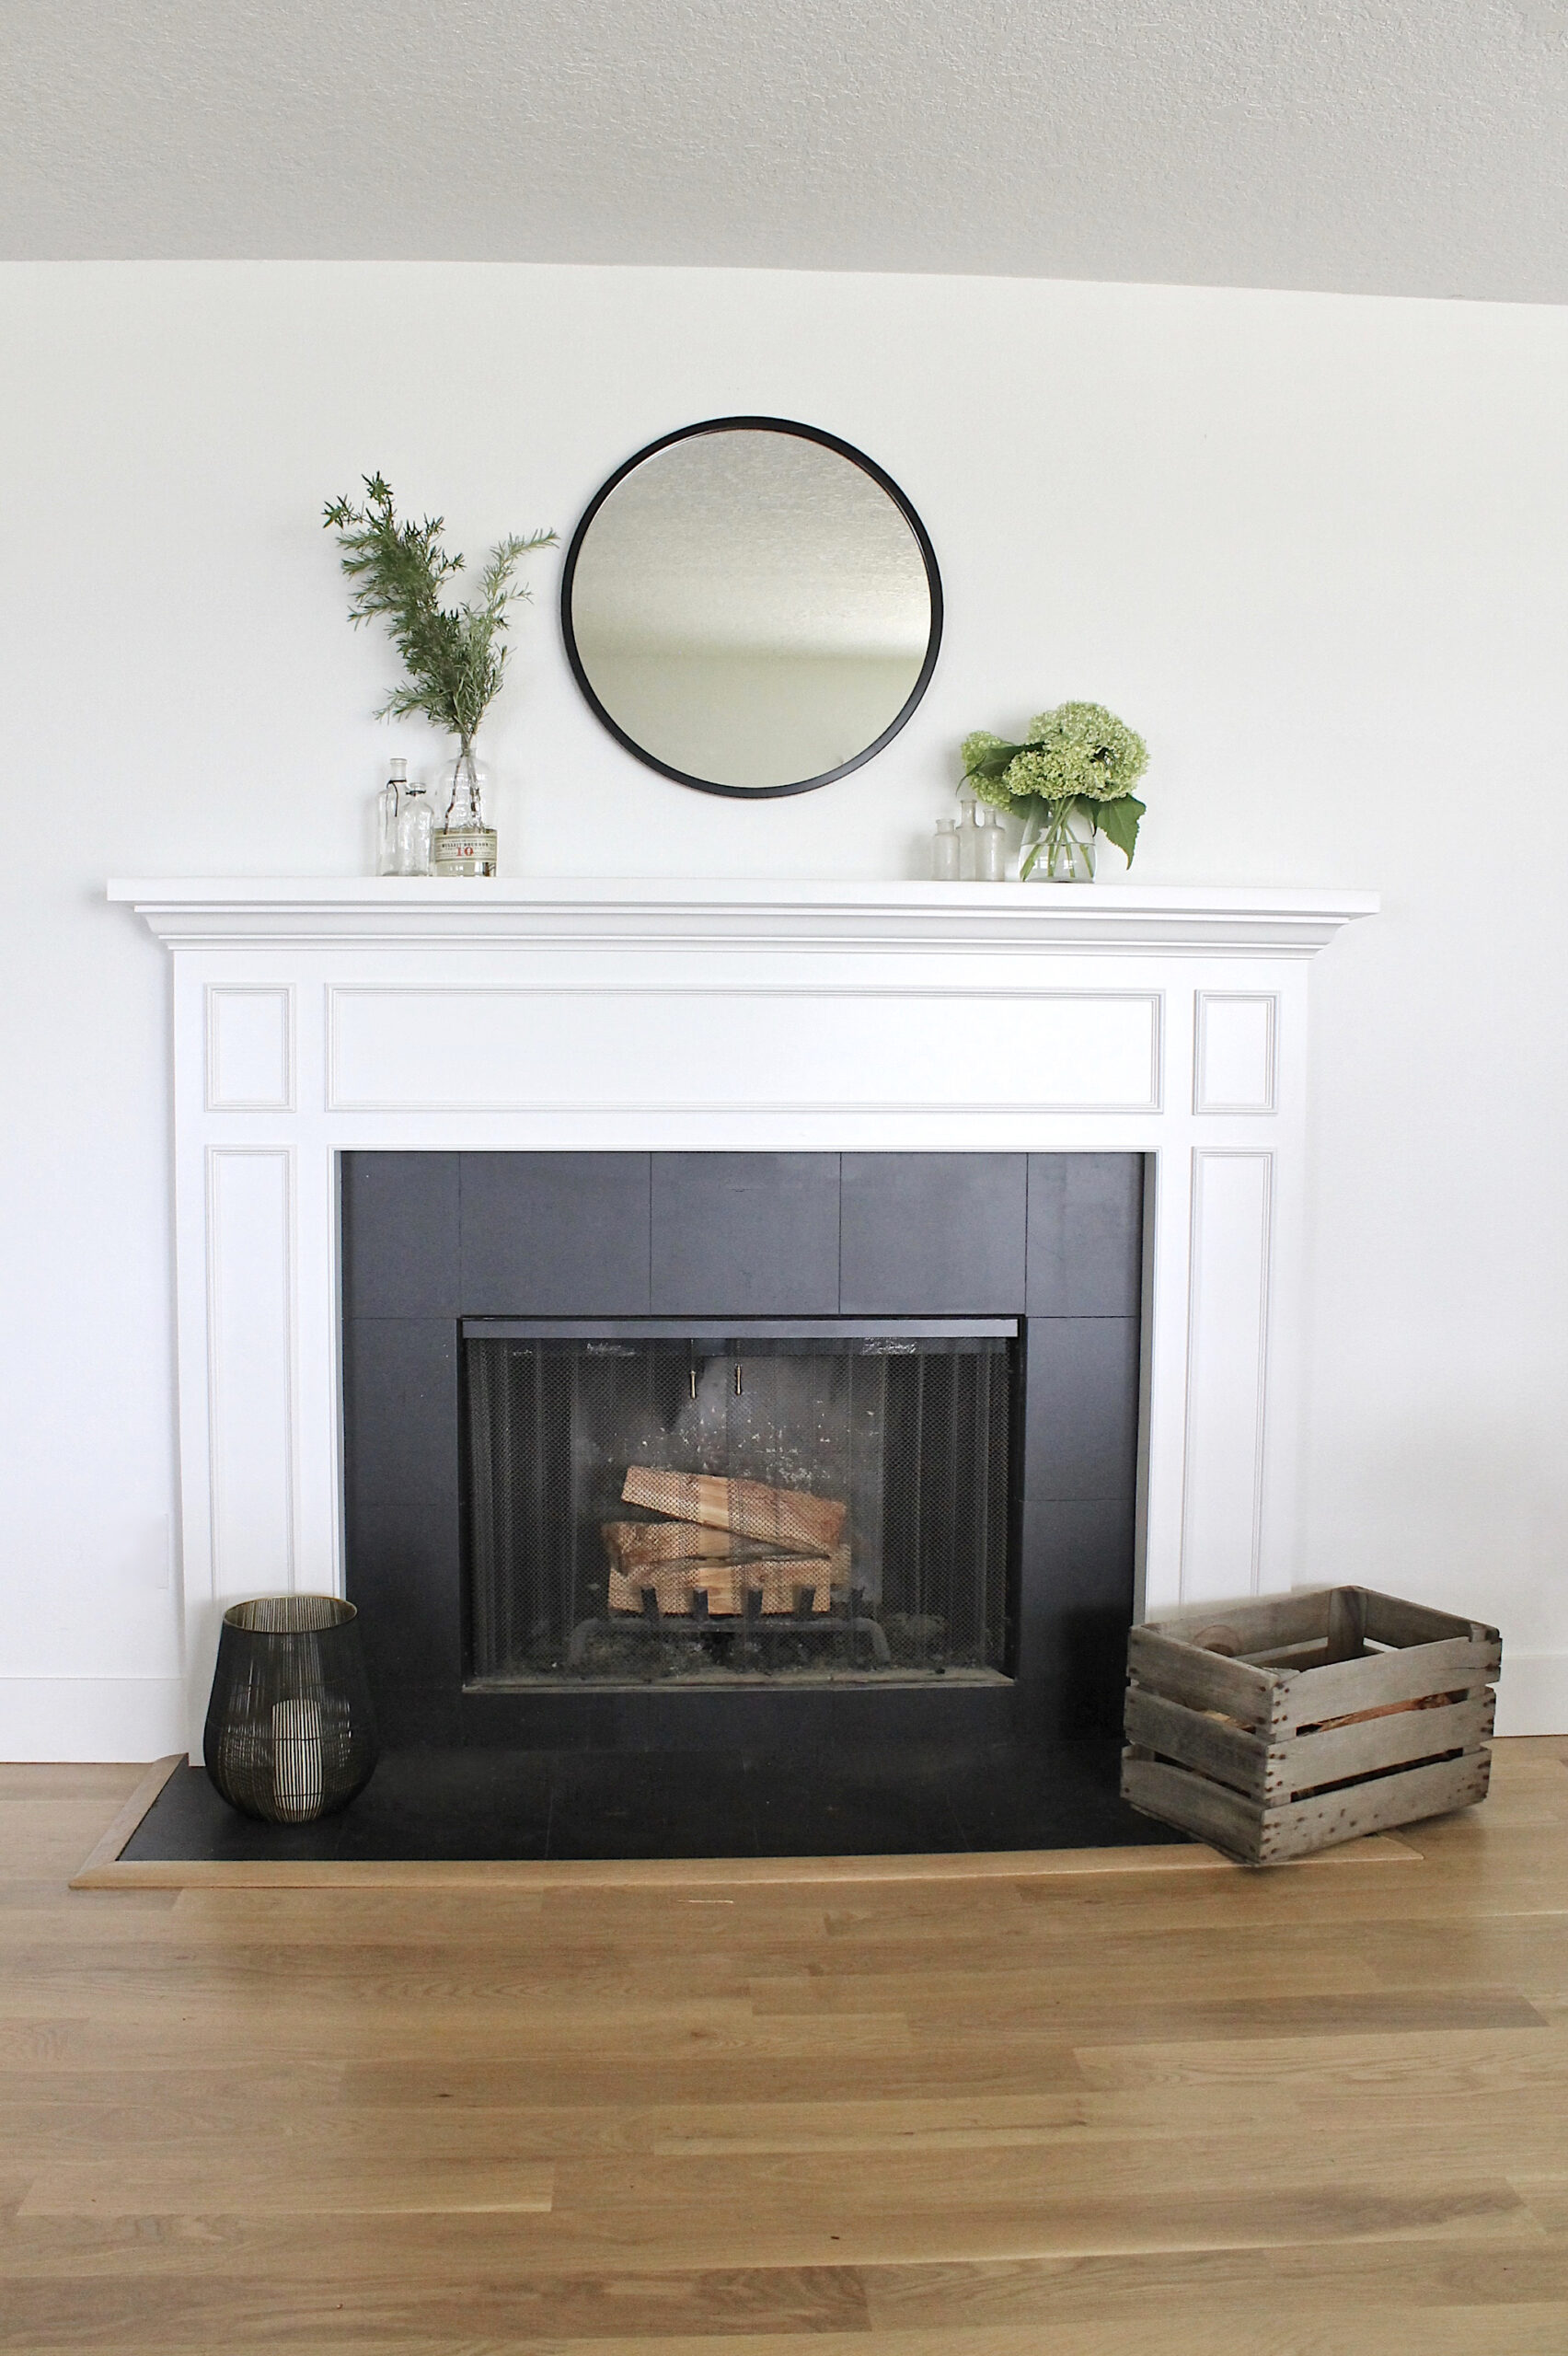 How To Paint A Ceramic Tile Fireplace, How To Clean Tile Around Fireplace